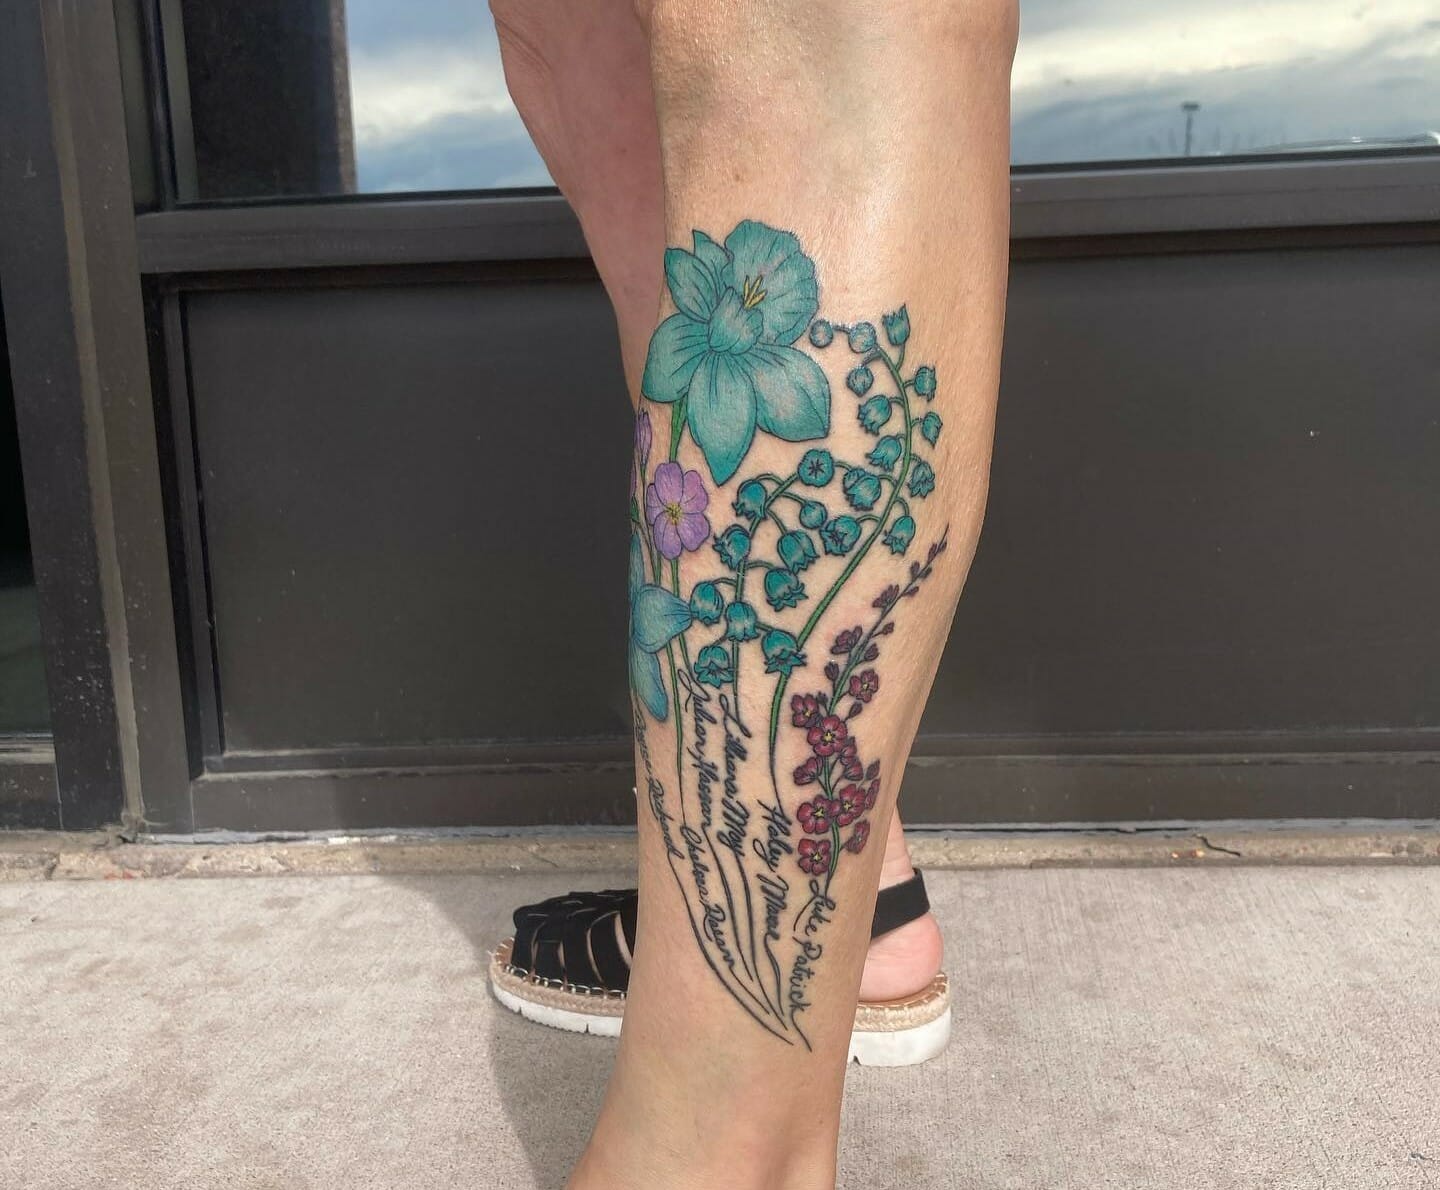 Hamiltons Tattoo Studio  Rose and rosebuds my client wanted a design  that represented her children and grandchildren This was a large tattoo on  her right thigh tattoo tattoodesign tattooideas inkspiration ink 